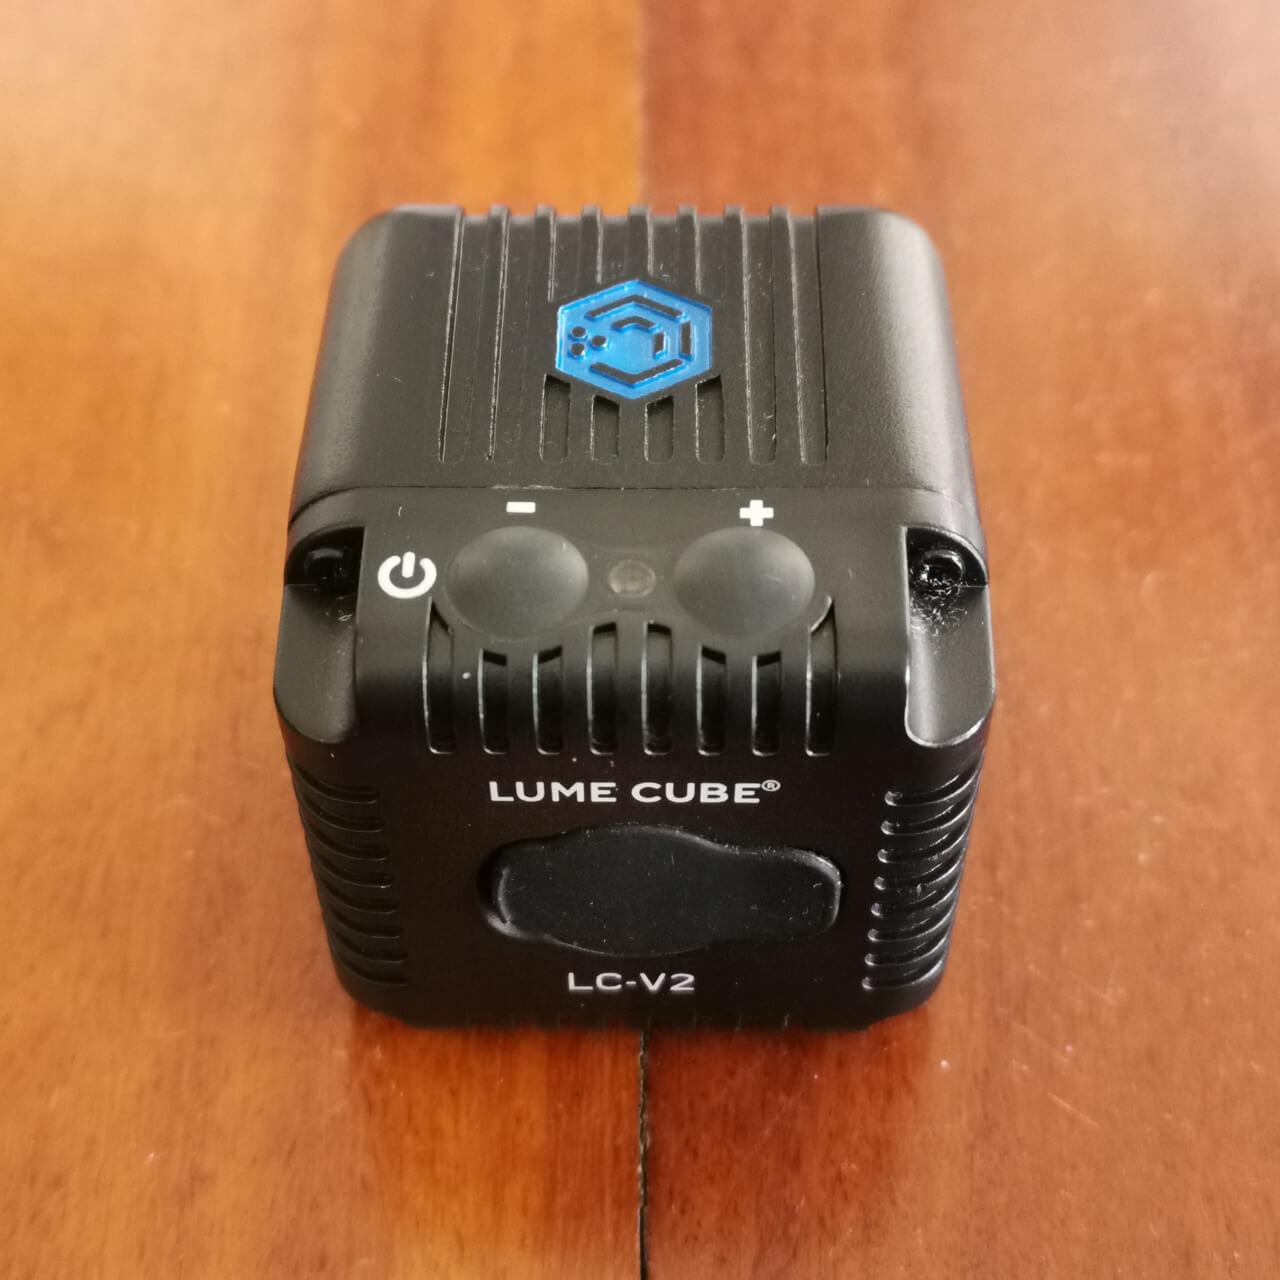 The LumeCube 2.0 has two buttons and a USB-C charging port